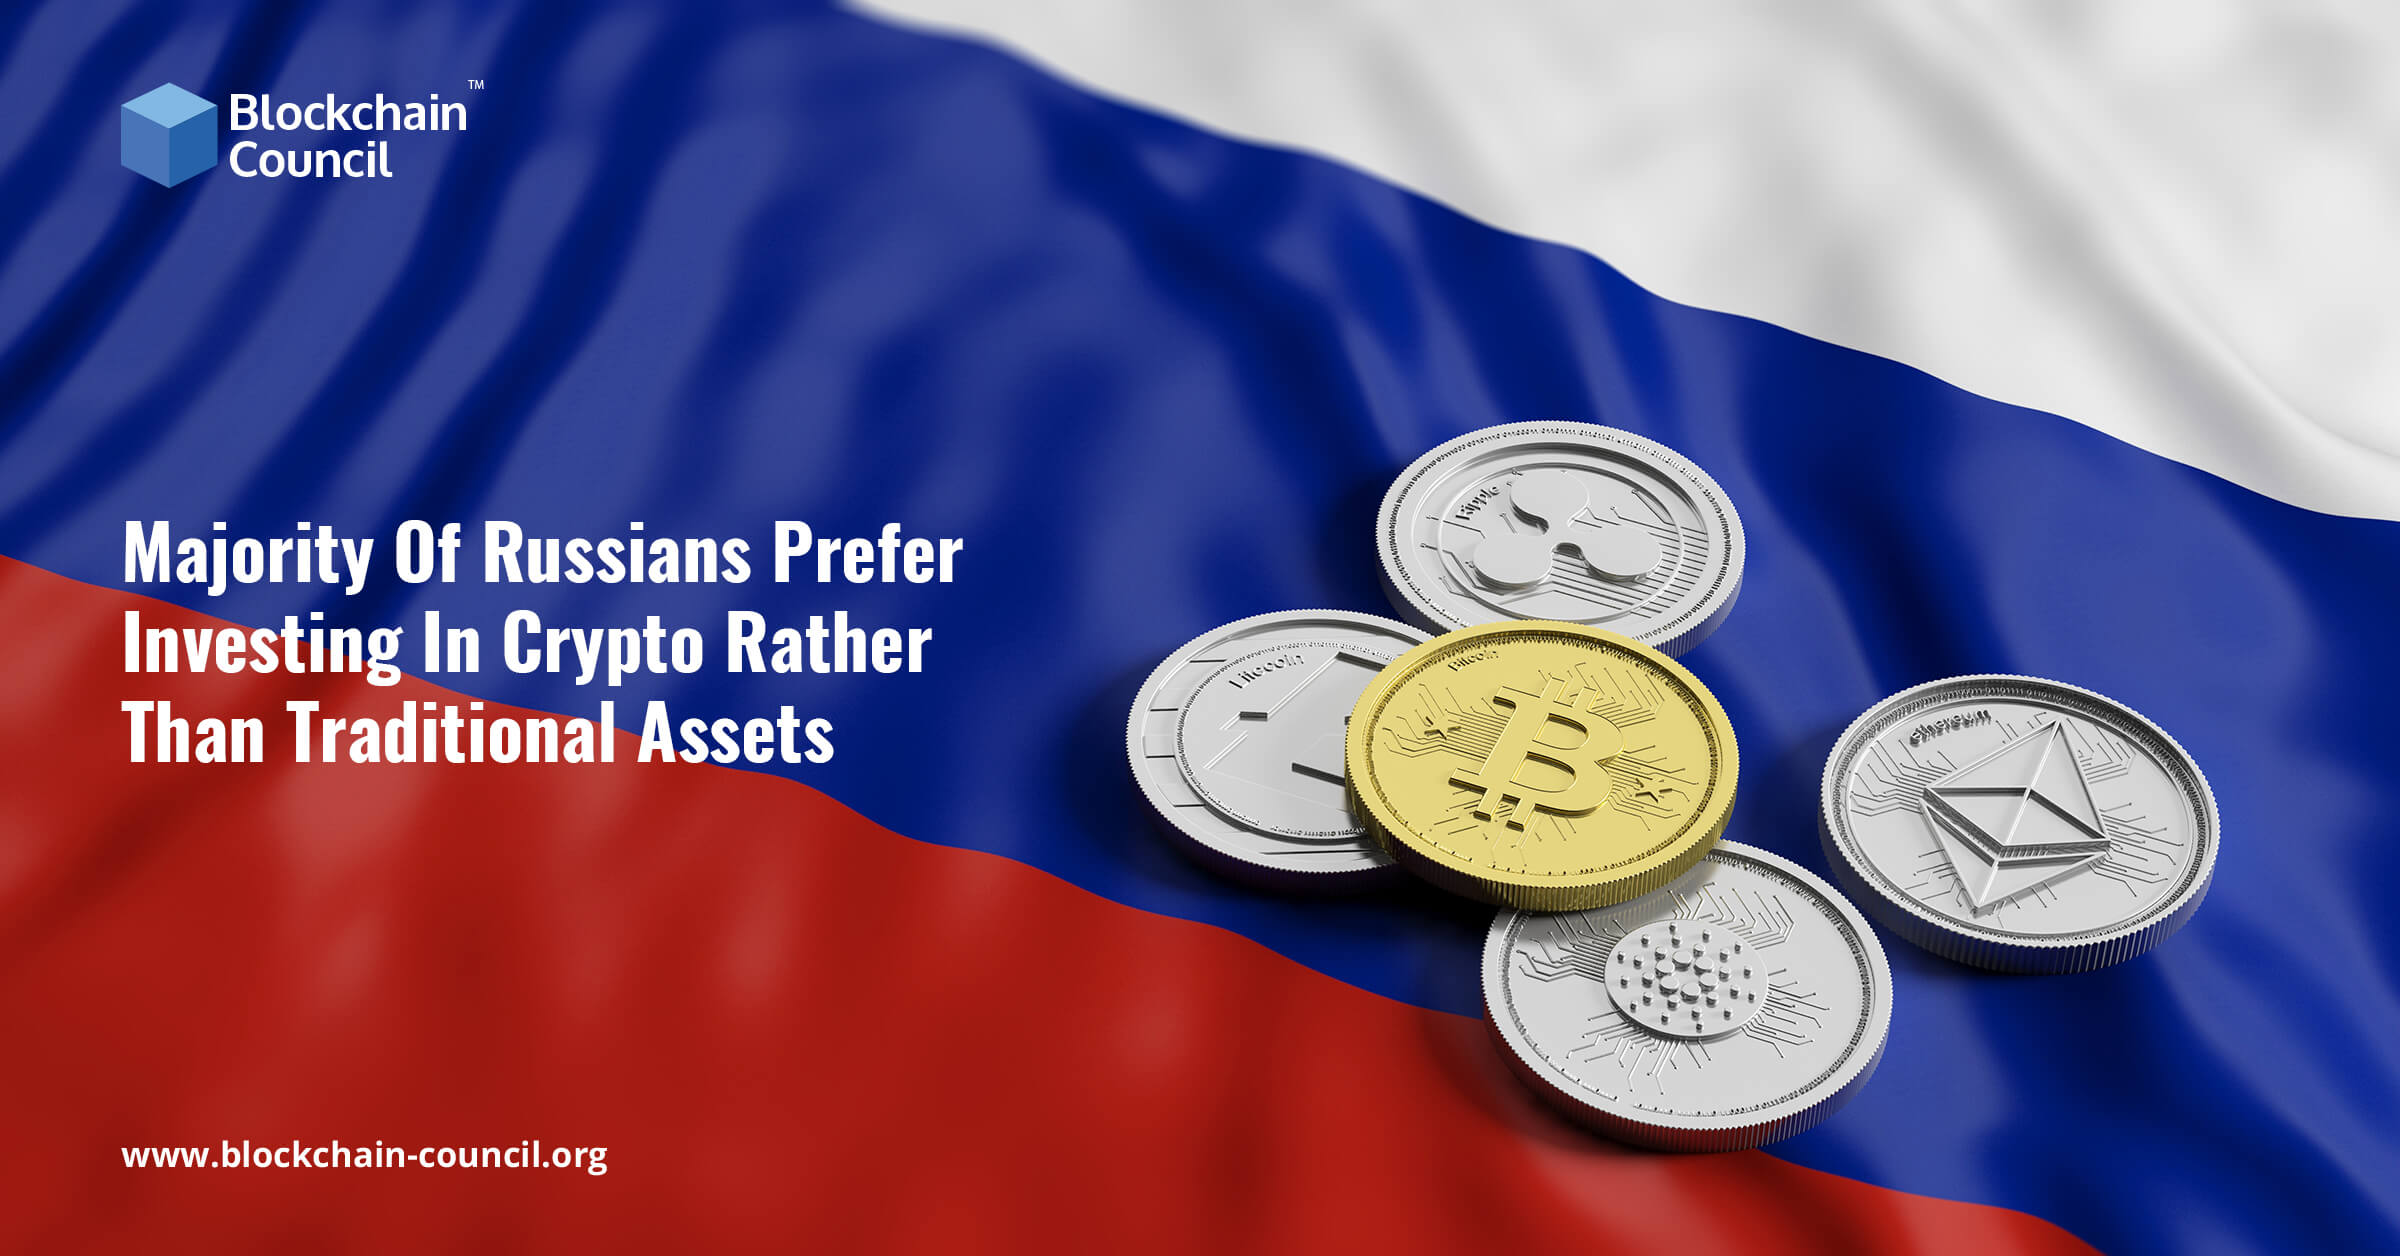 The Majority Of Russians Prefer Investing In Crypto Rather Than Traditional Assets